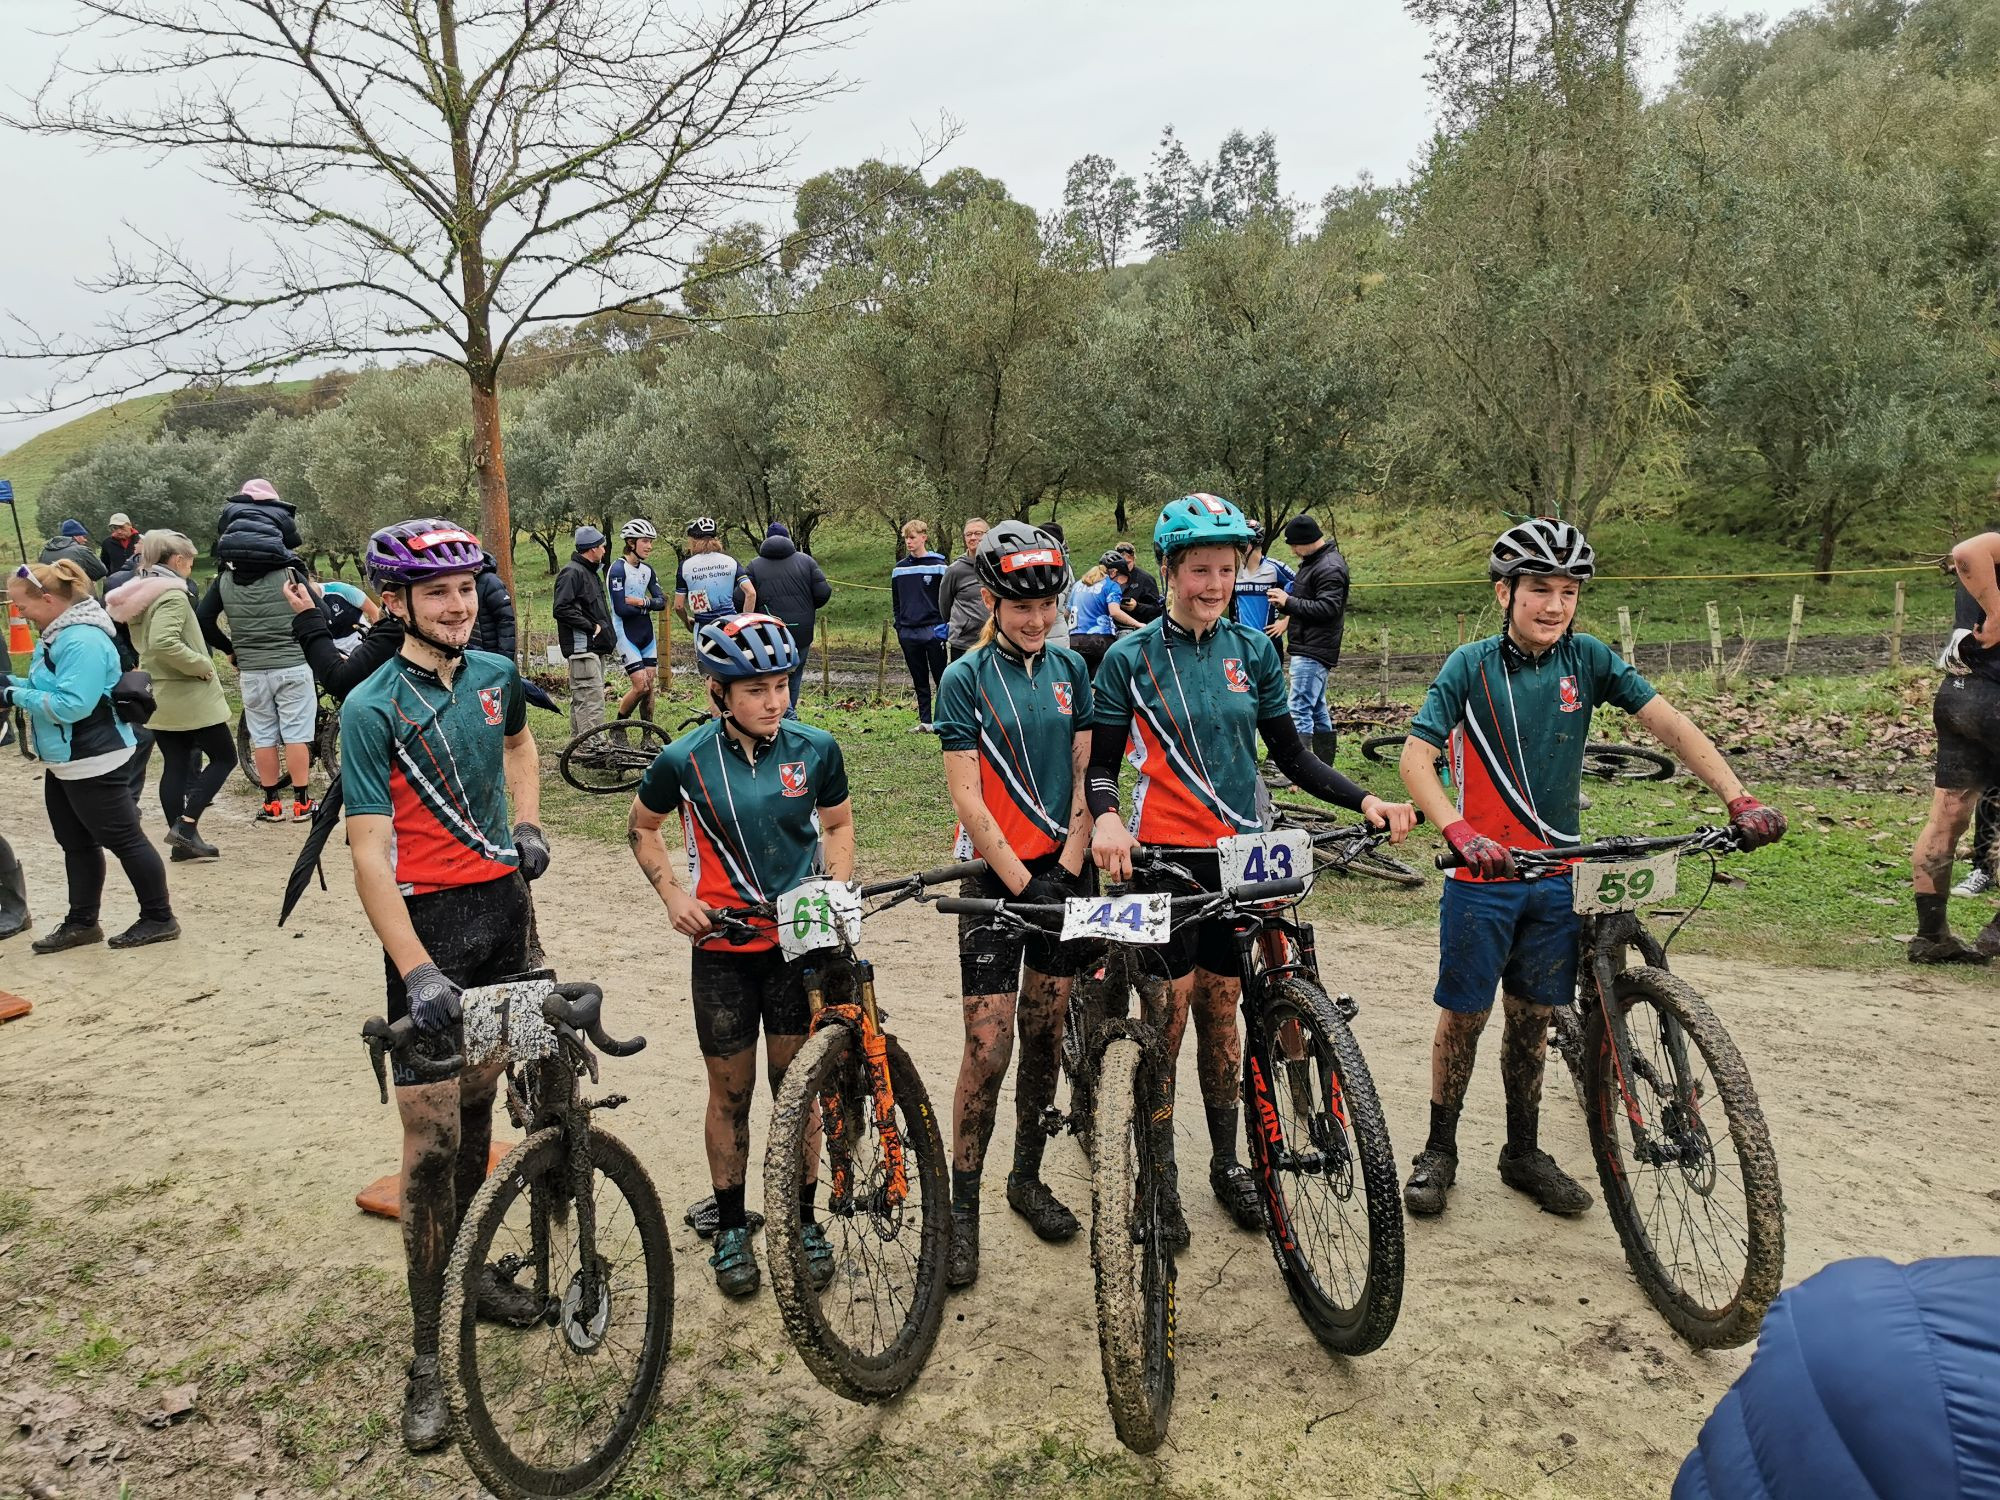 Outstanding efforts at recent NISS Cyclecross